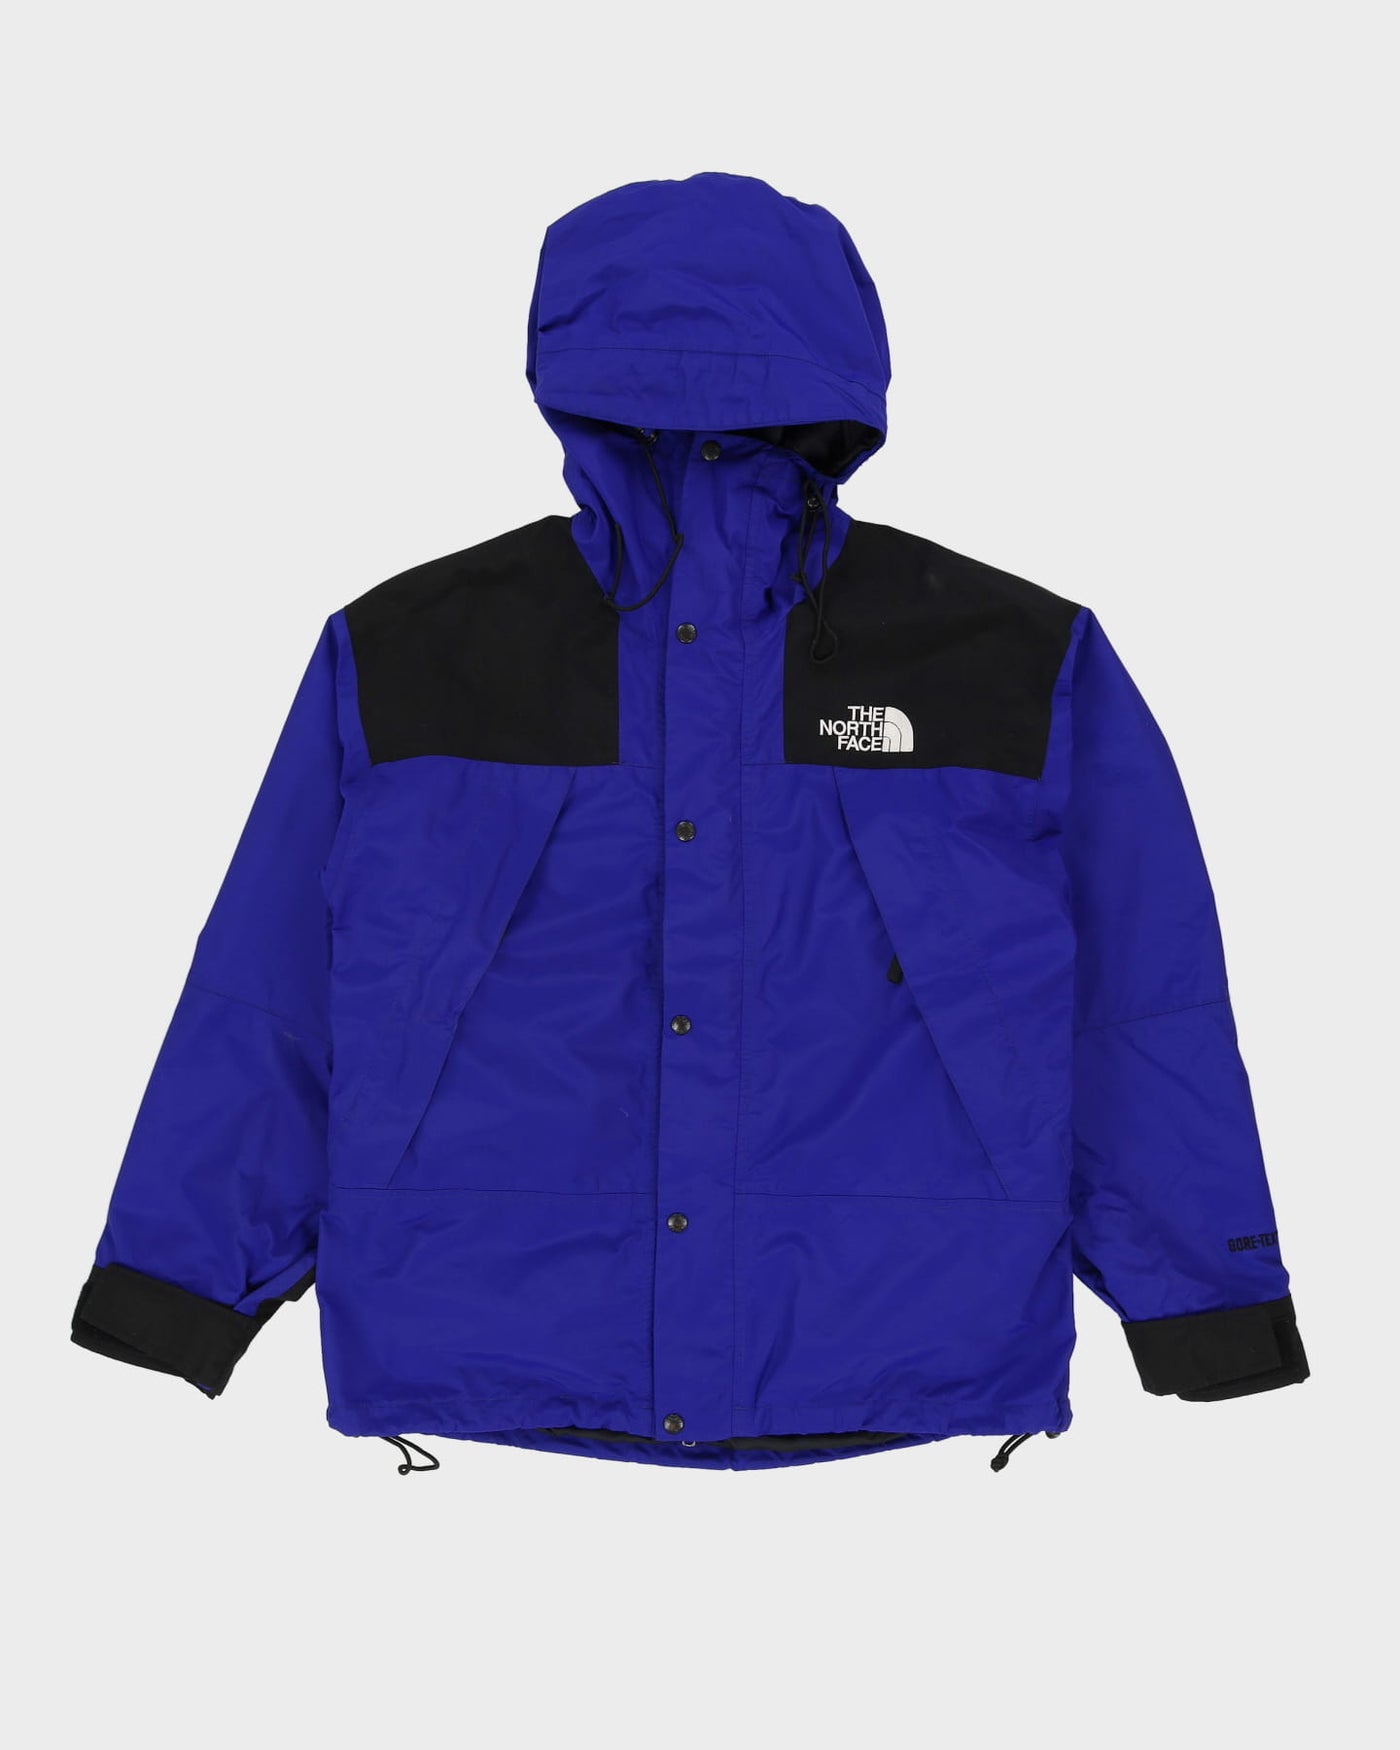 Vintage 90s The North Face Blue Hooded Anorak Jacket - L